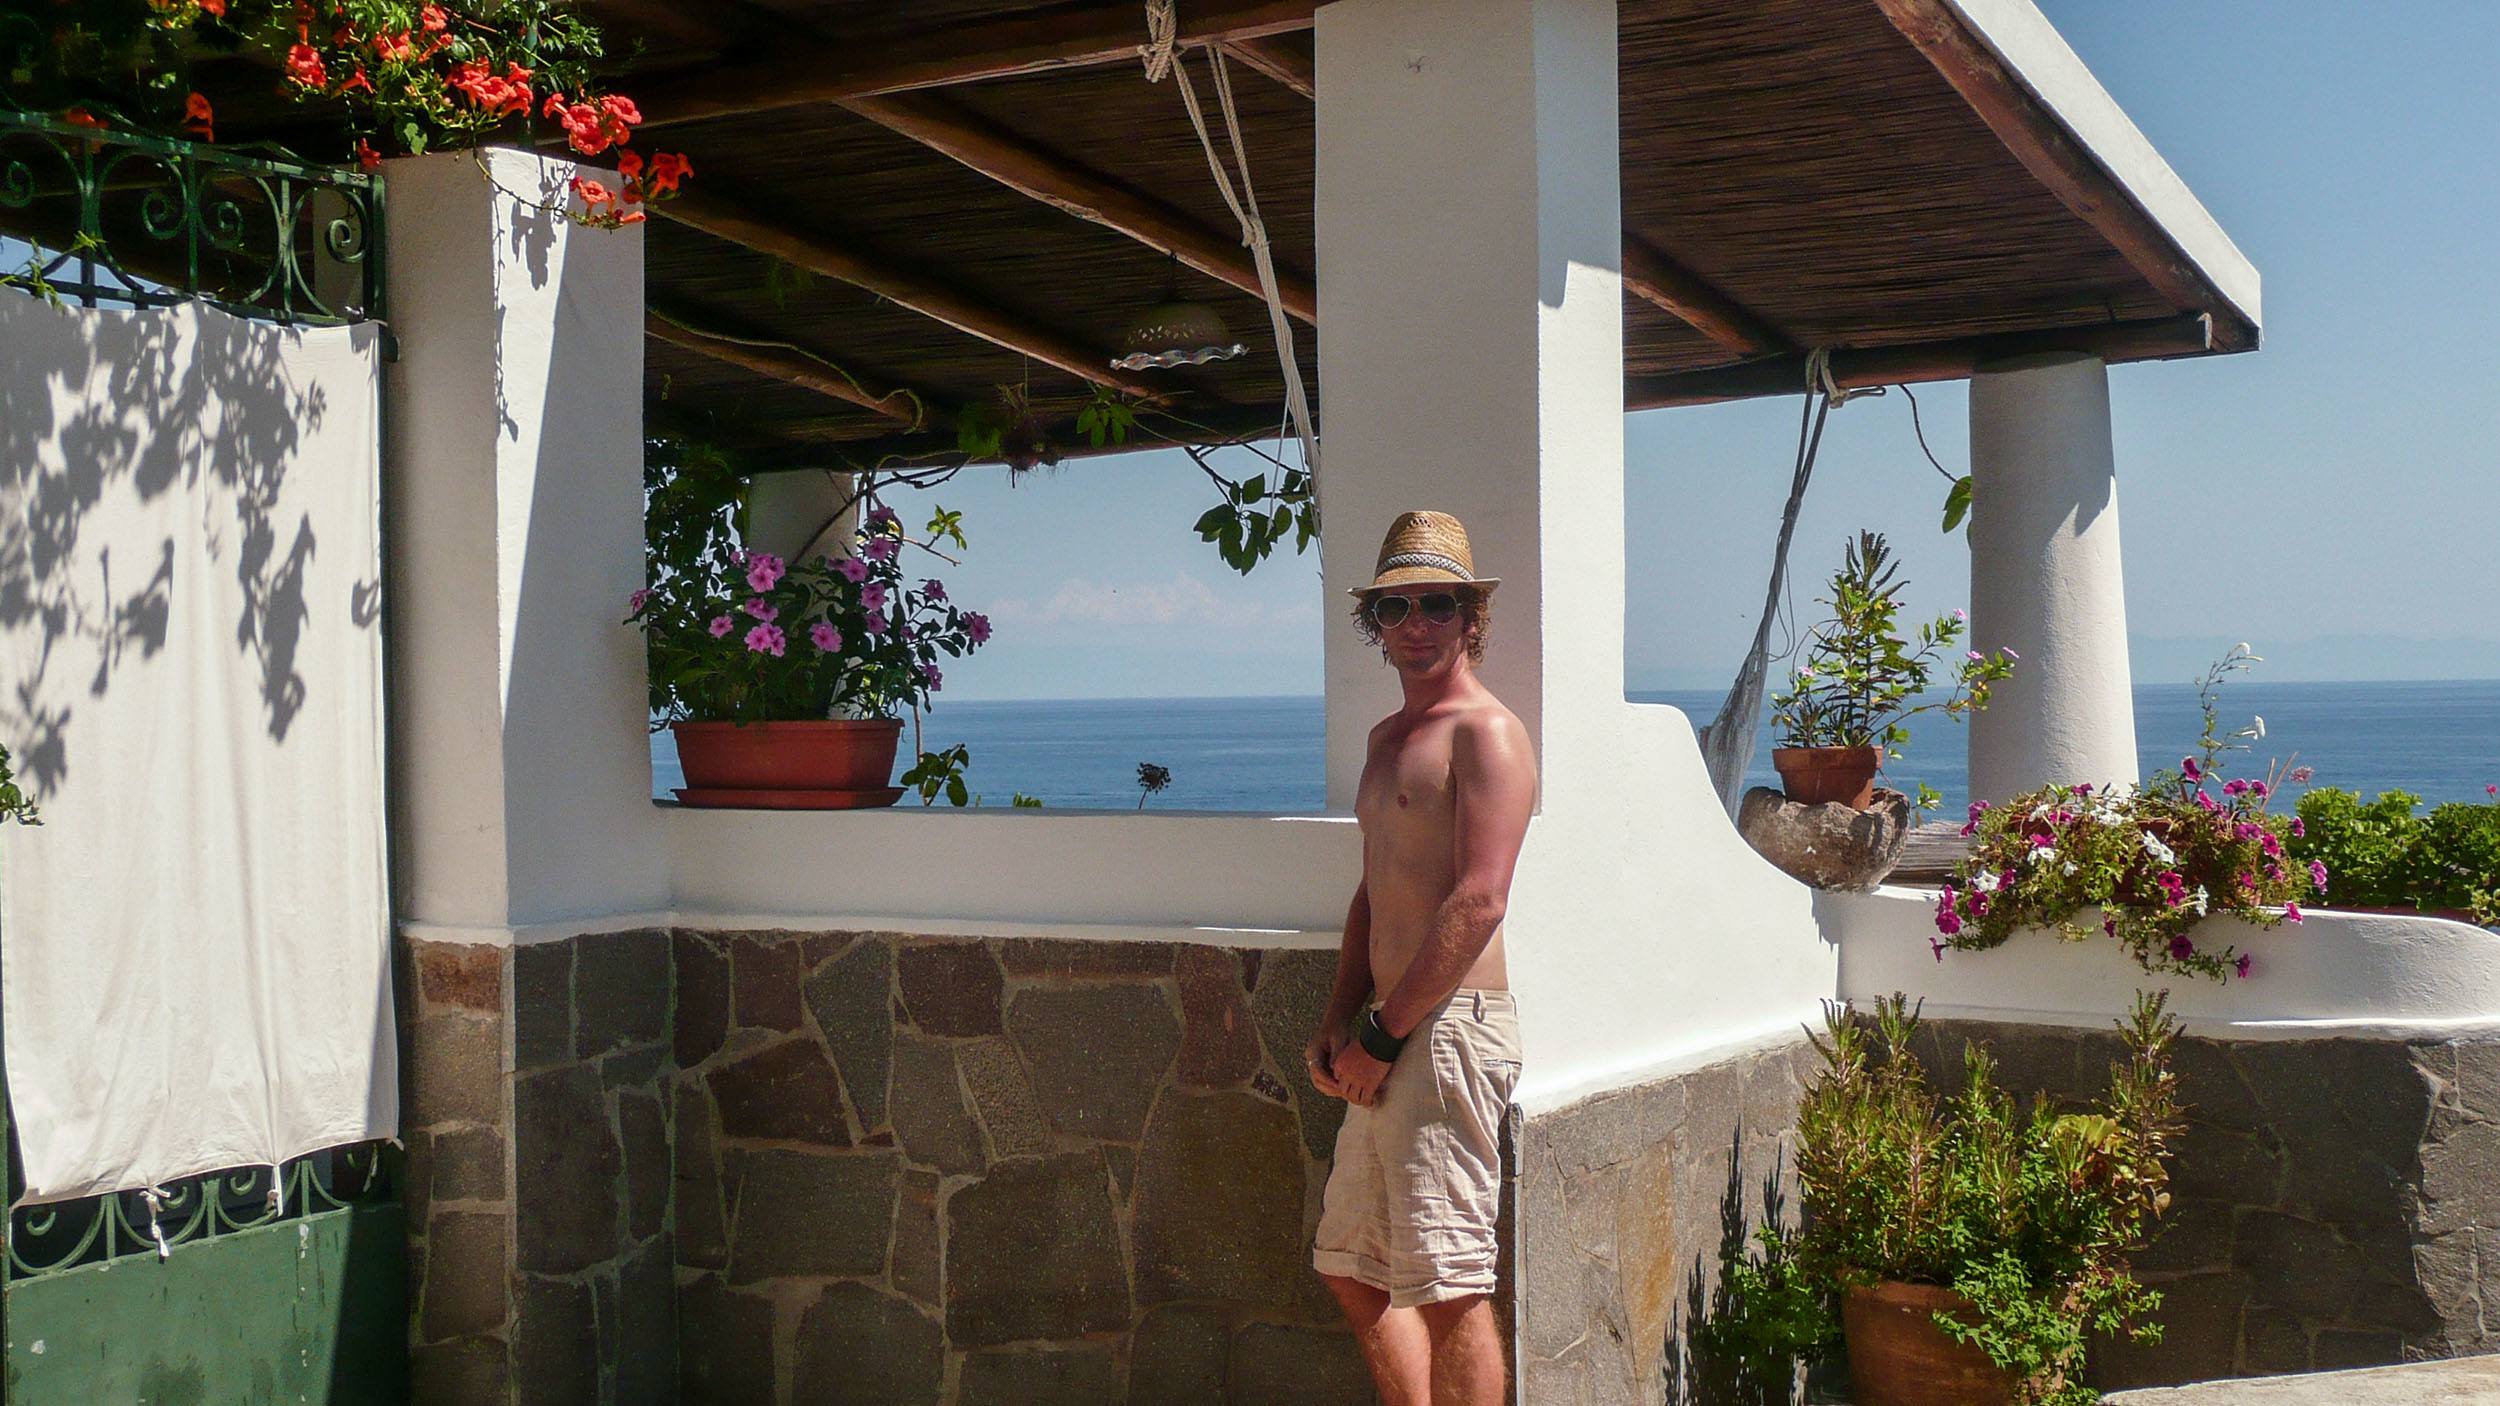 Ben leaning against white house on Panarea in Sicily Italy